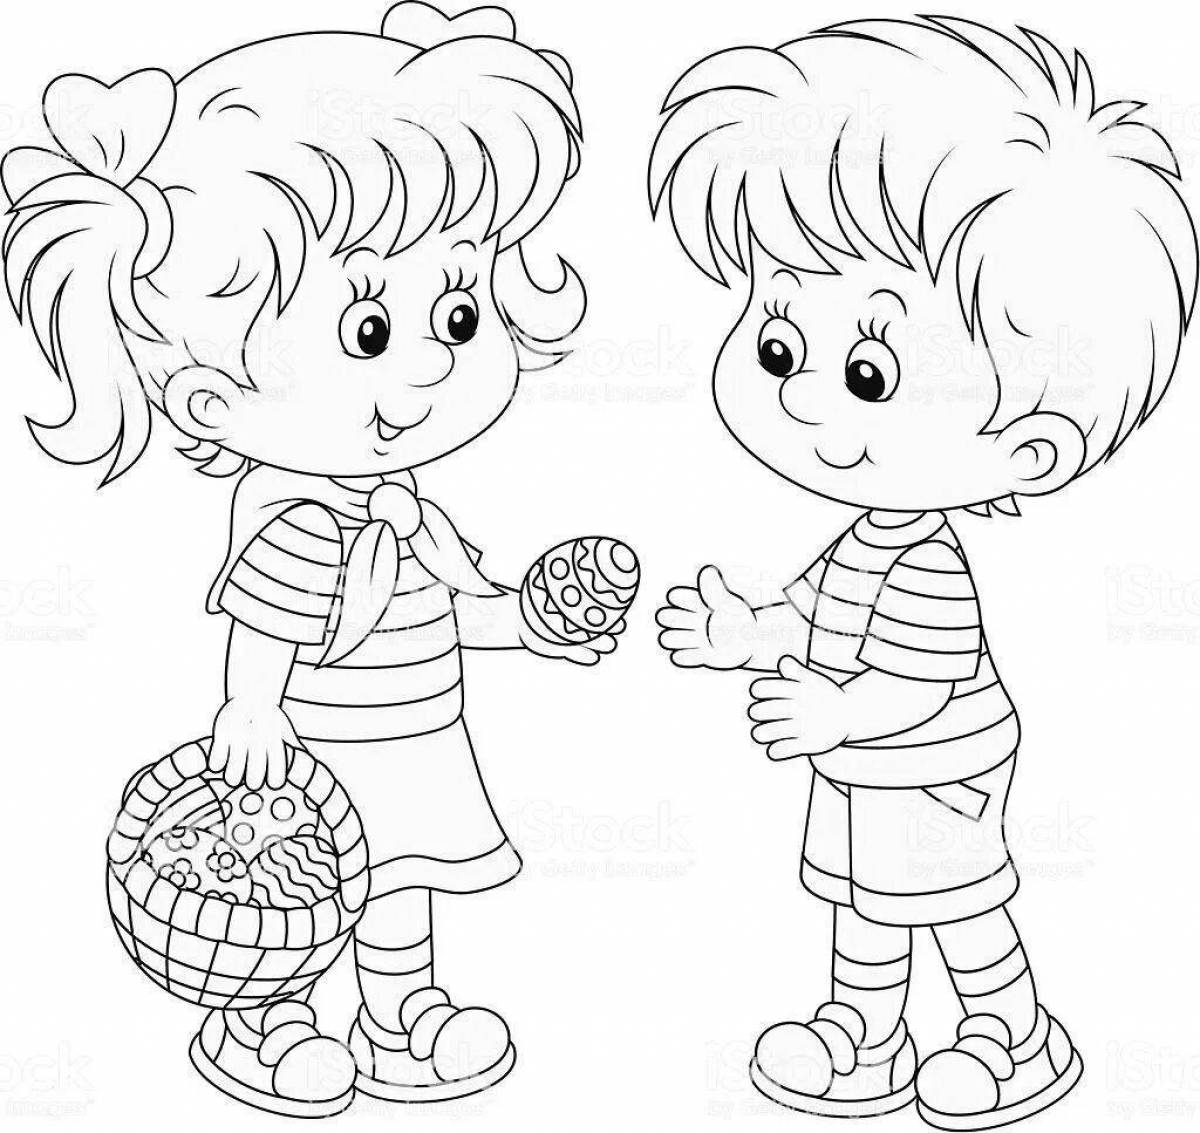 Animated coloring drawing of a girl and a boy